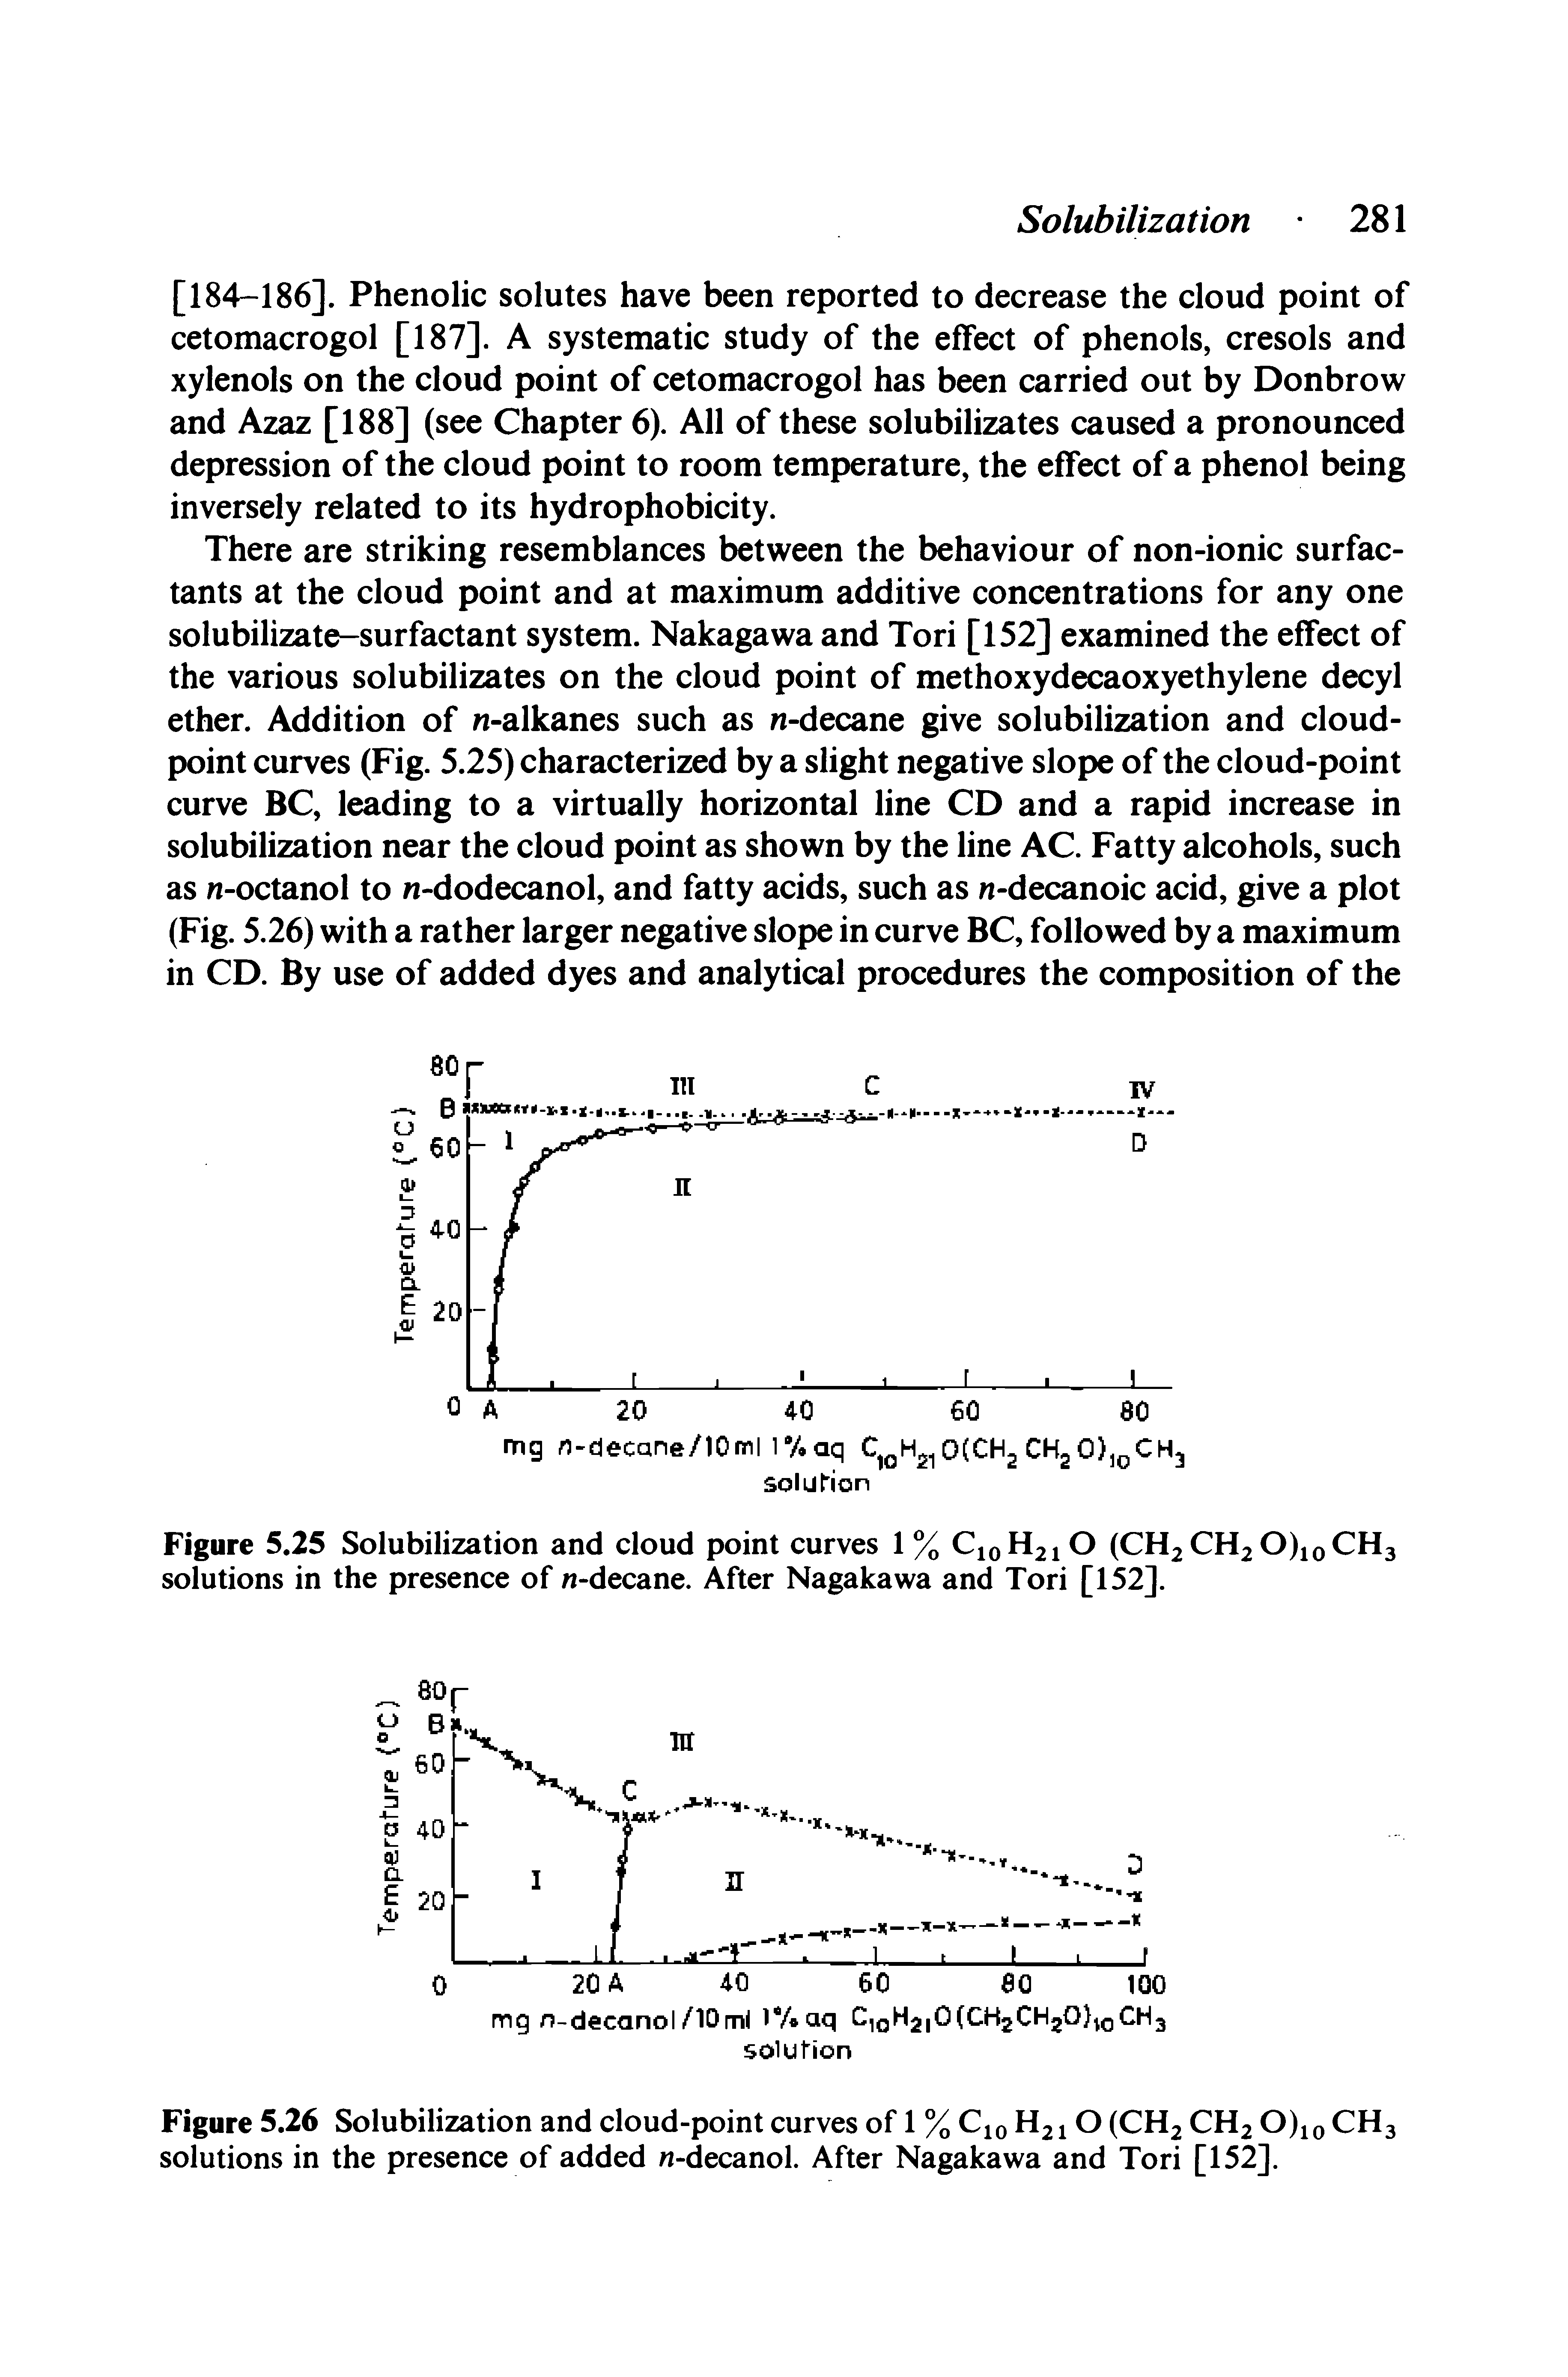 Figure 5.26 Solubilization and cloud-point curves of 1 % Cjo H210 (CH2 CH2 O)io CH3 solutions in the presence of added n-decanol. After Nagakawa and Tori [152].